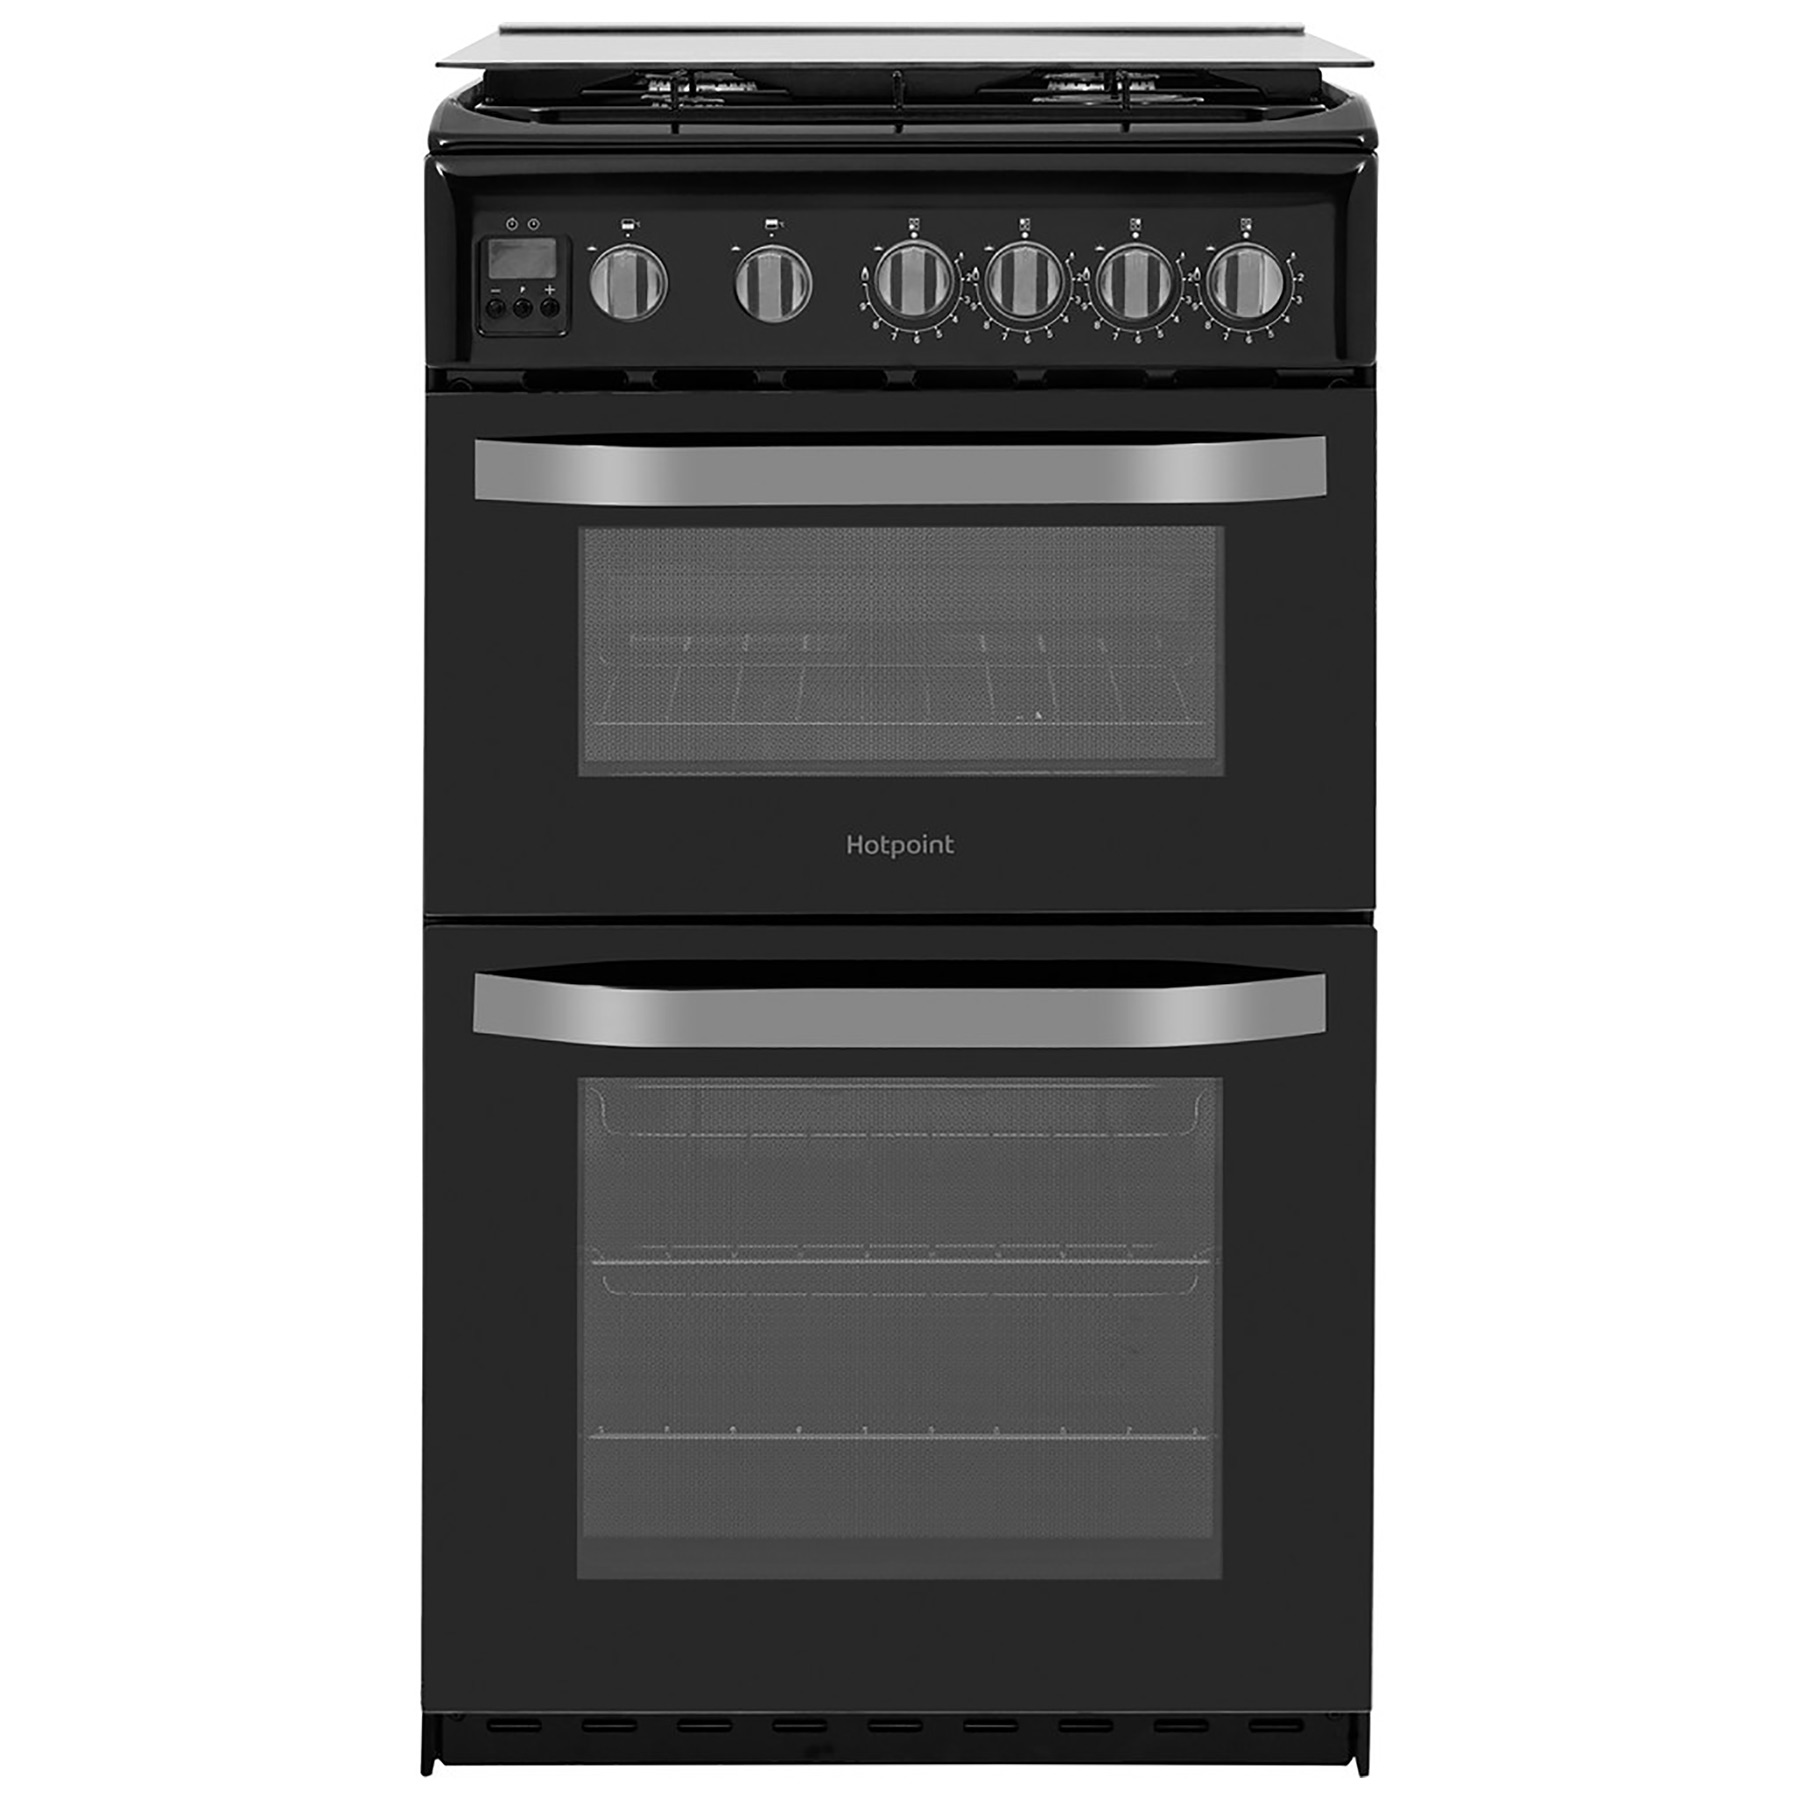 Image of Hotpoint HD5G00CCBK 50cm Double Oven Gas Cooker in Black Catalytic Lin